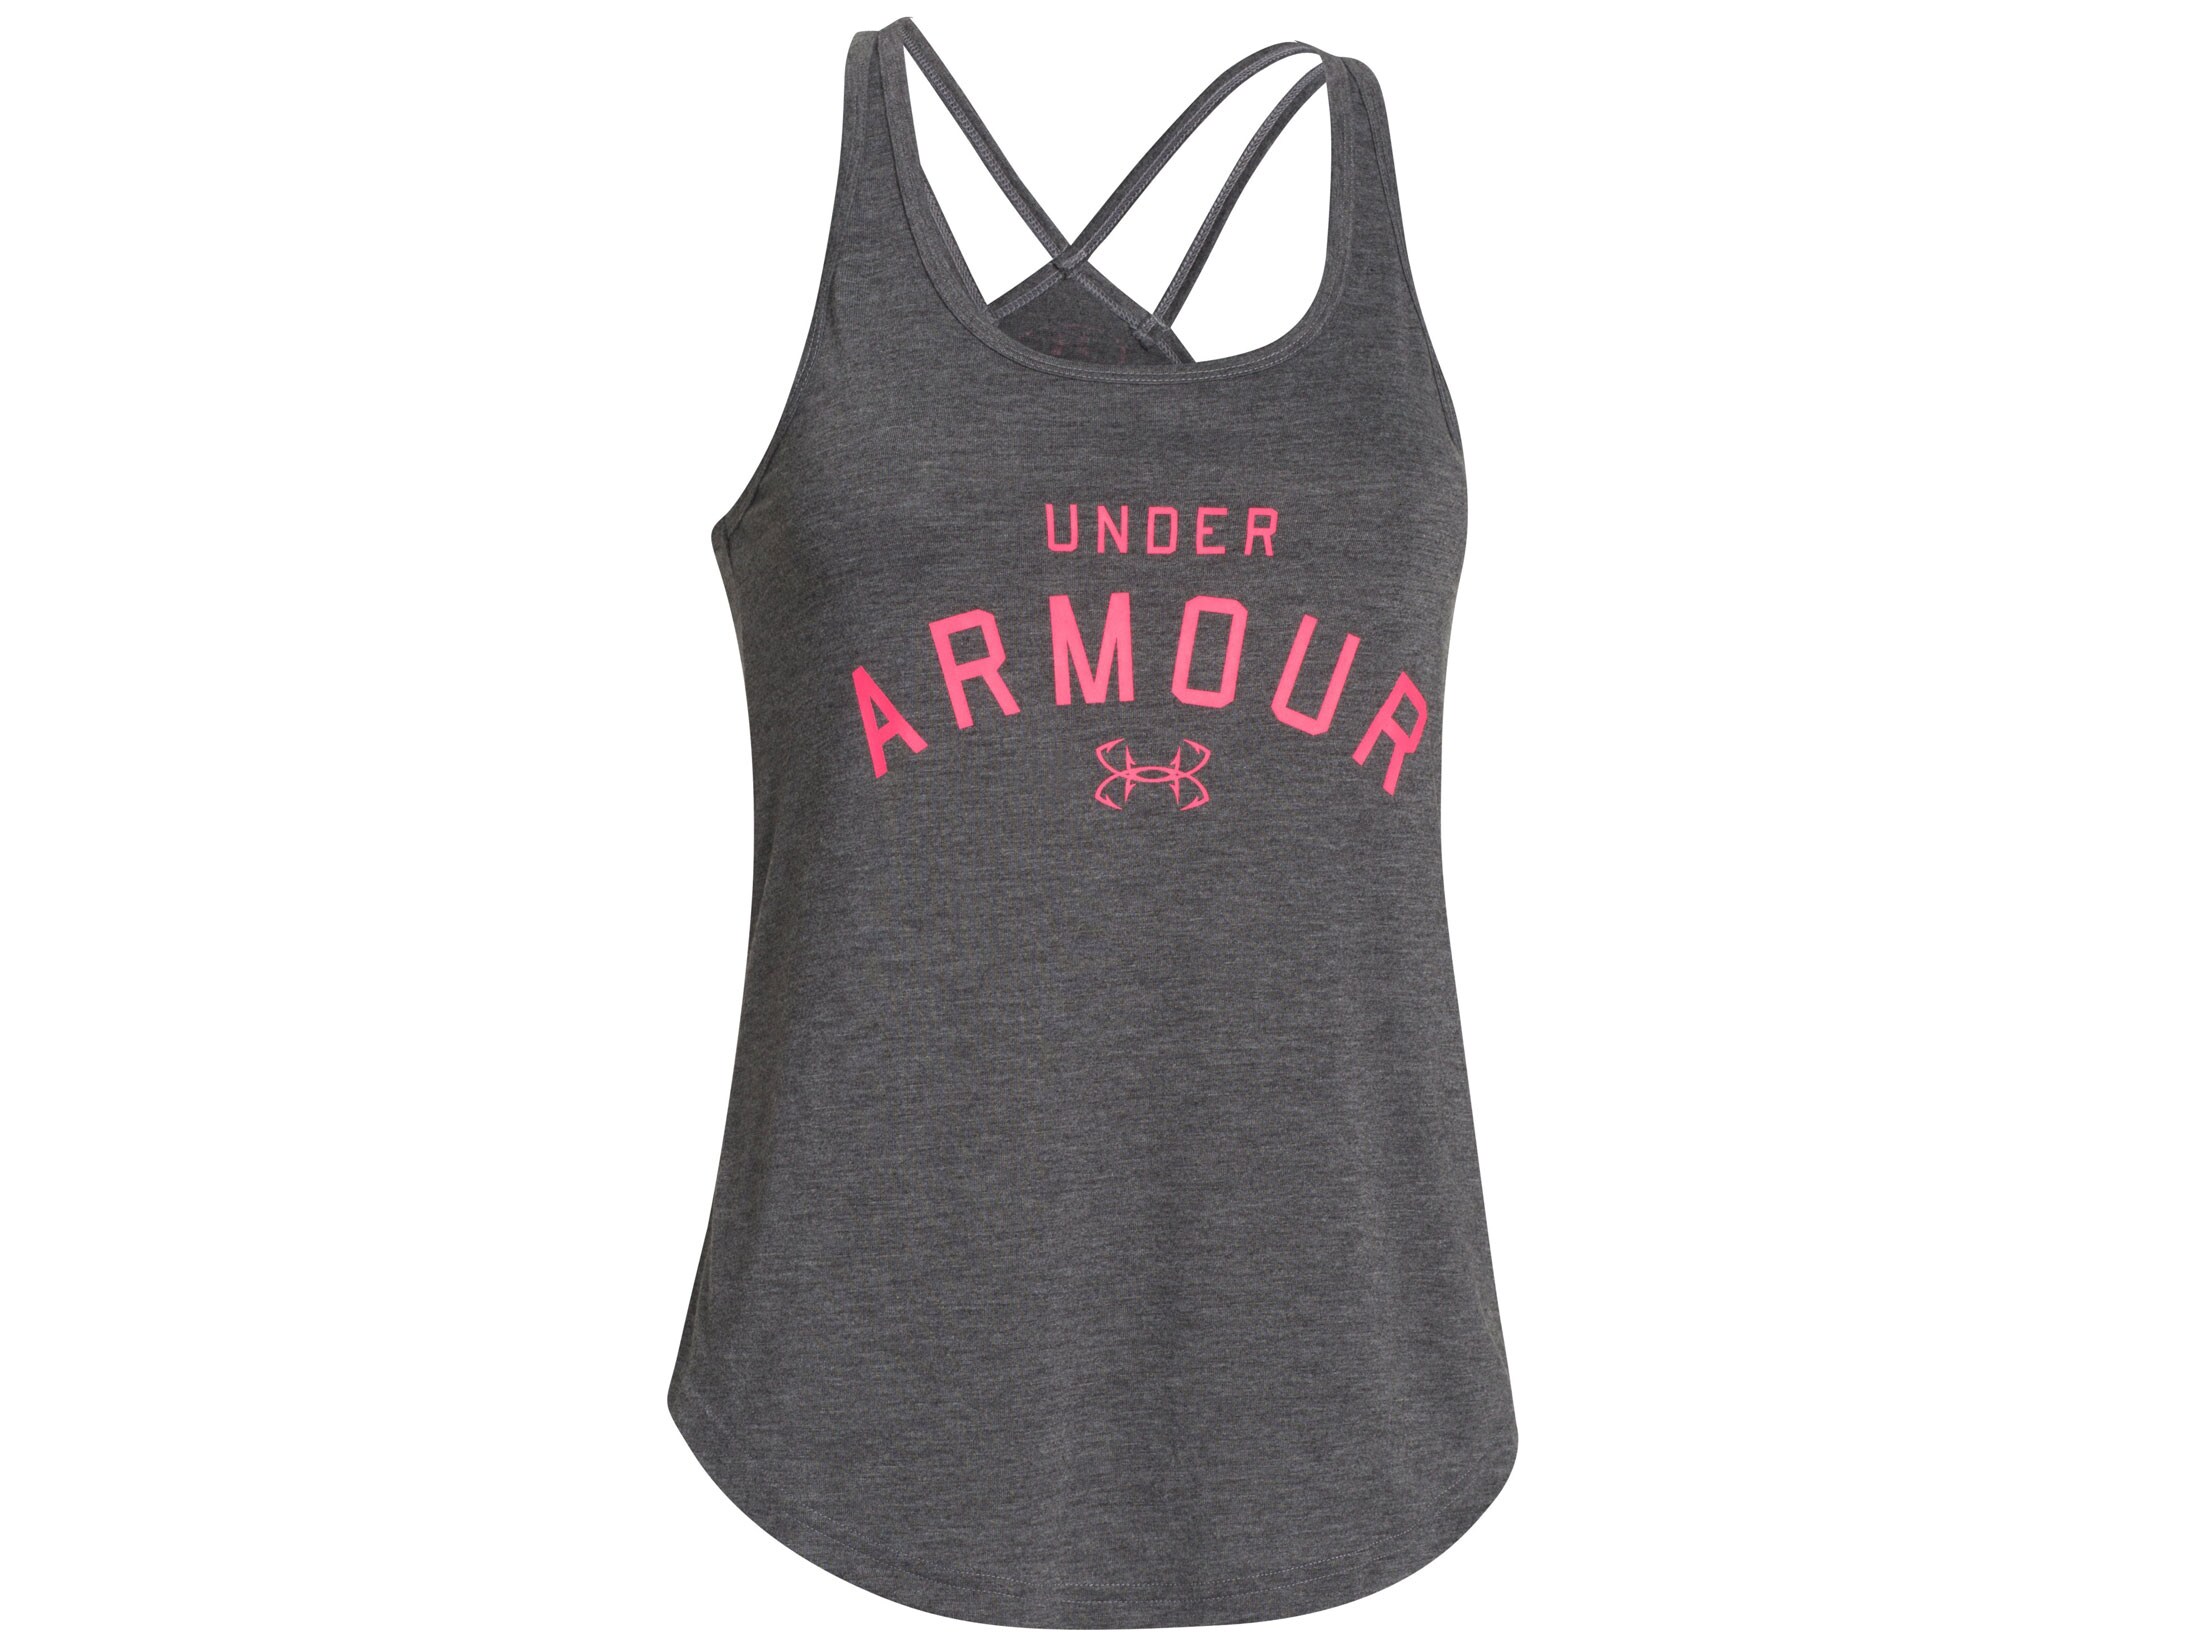 Under Armour Women's Graphic Tank Top Shirt Synthetic Blend Picasso